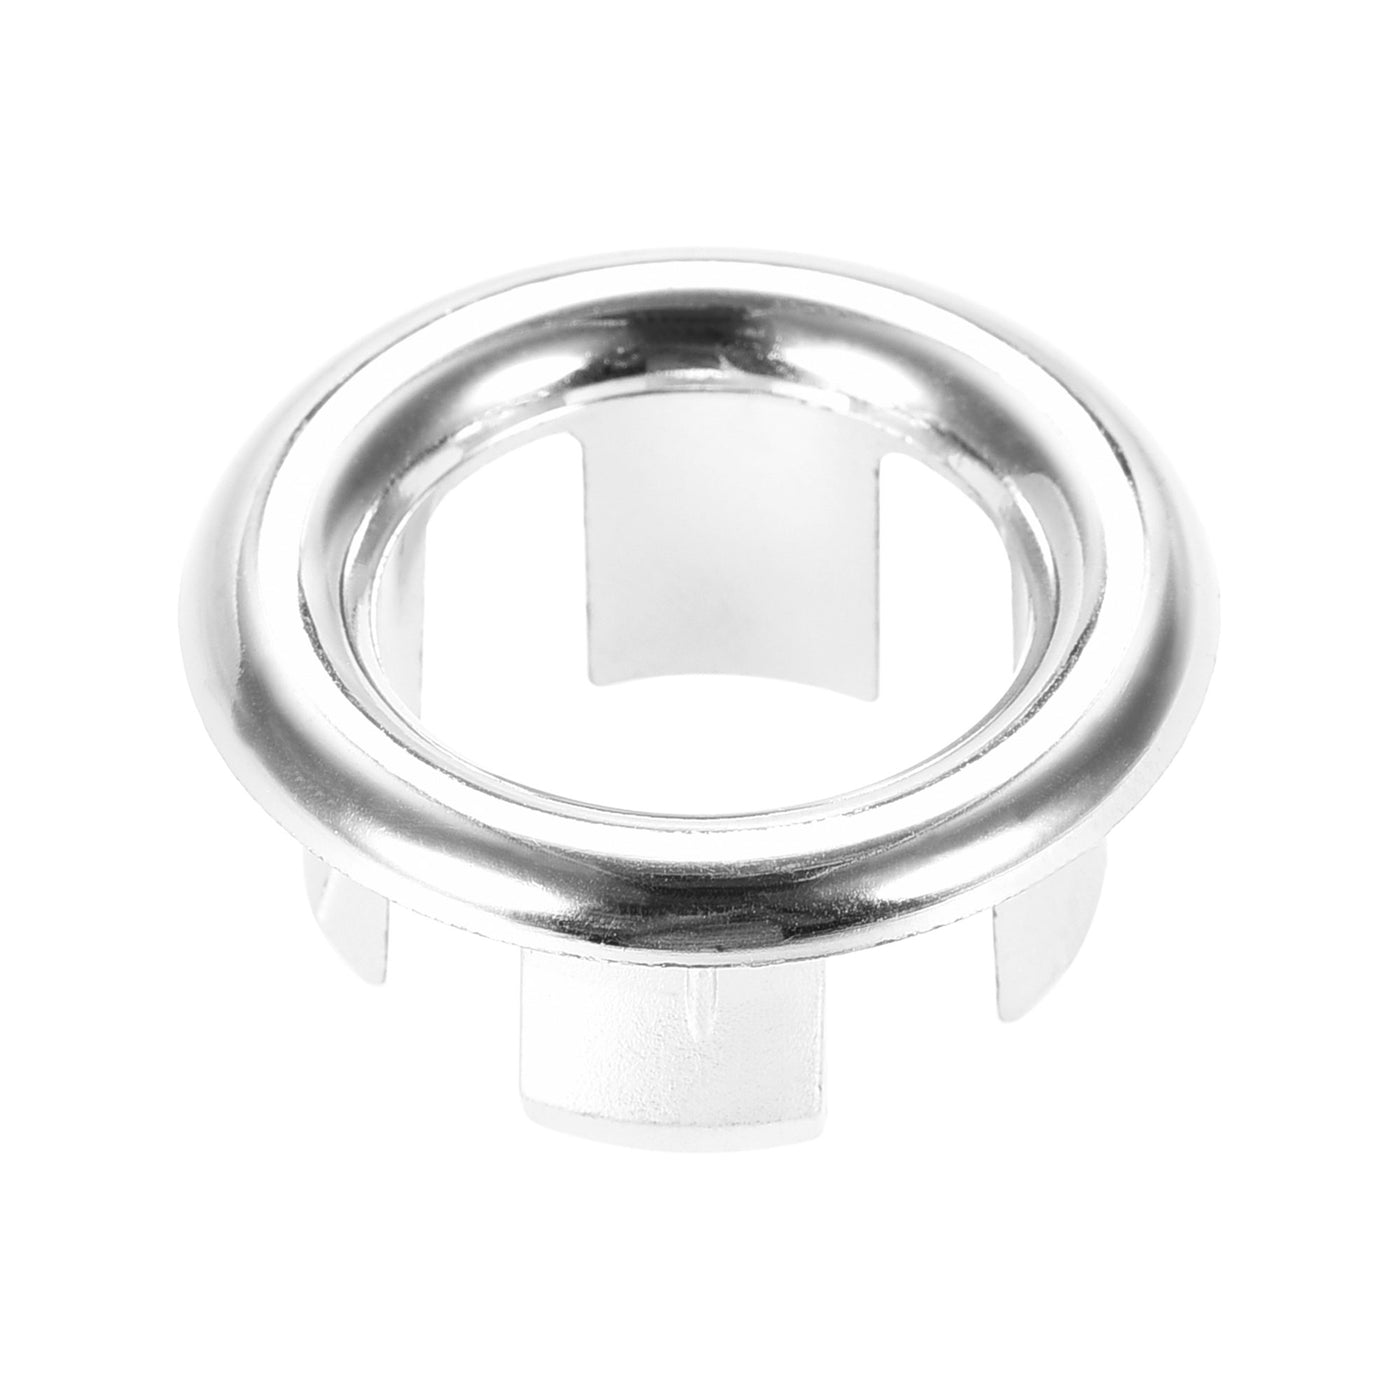 uxcell Uxcell Sink Basin Trim Overflow Cover Insert in Hole Ring Covers Caps Silver Tone 6pcs